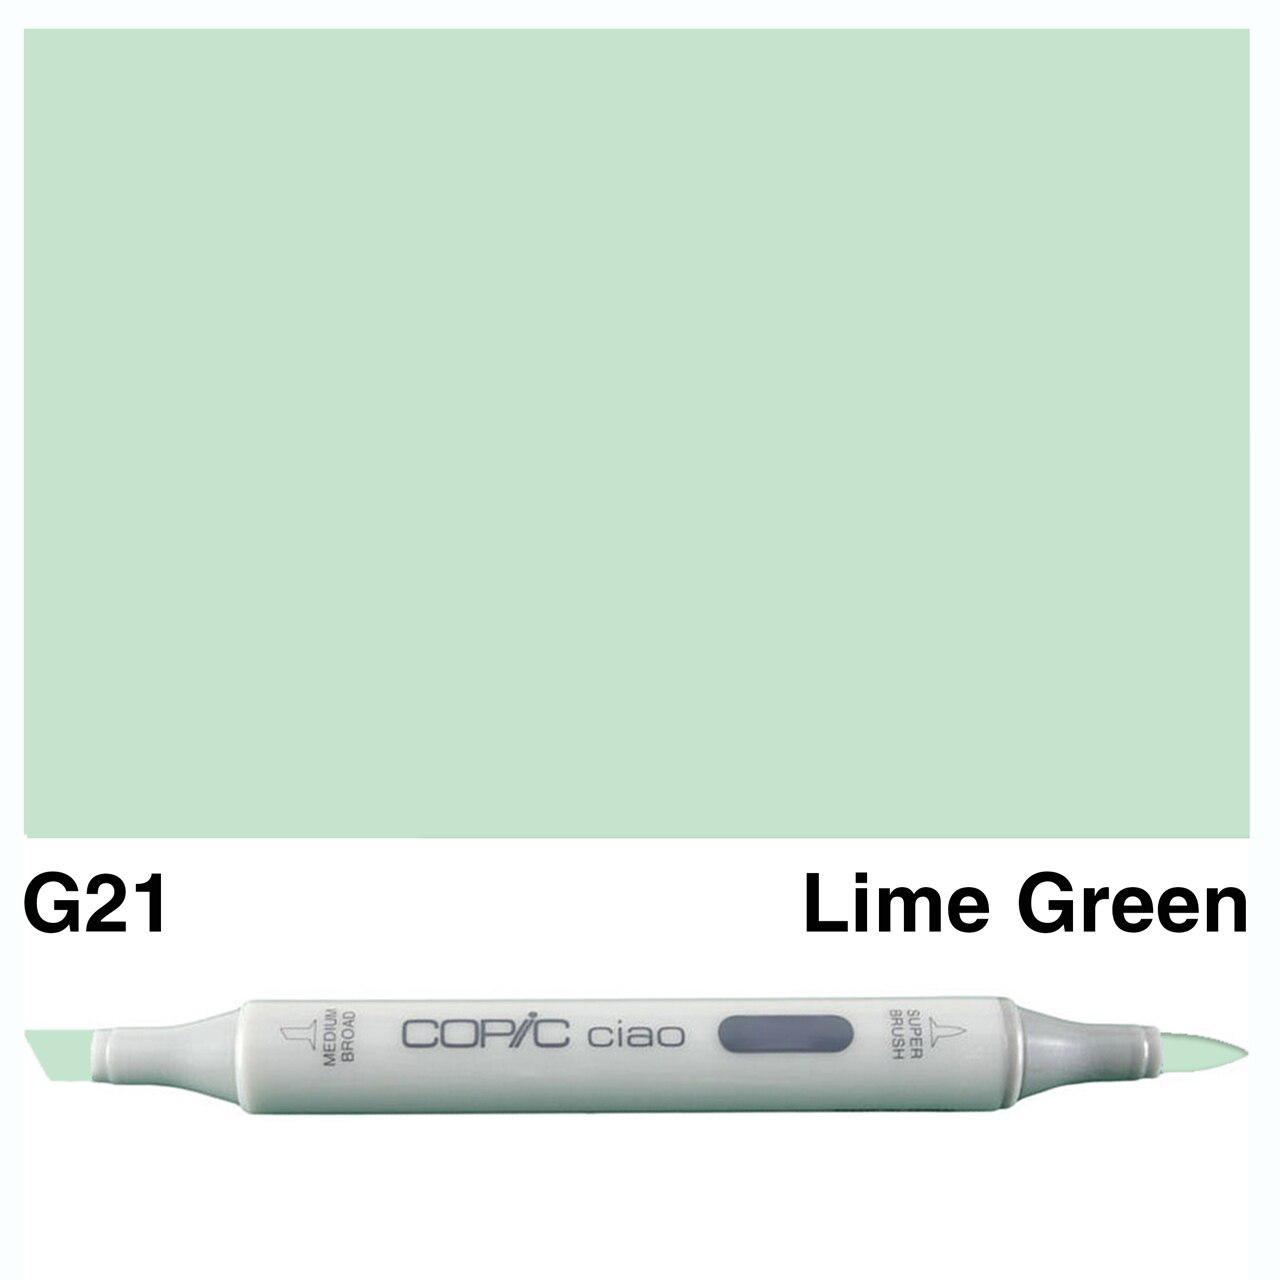 Copic - Ciao Marker - Lime Green - G21-ScrapbookPal